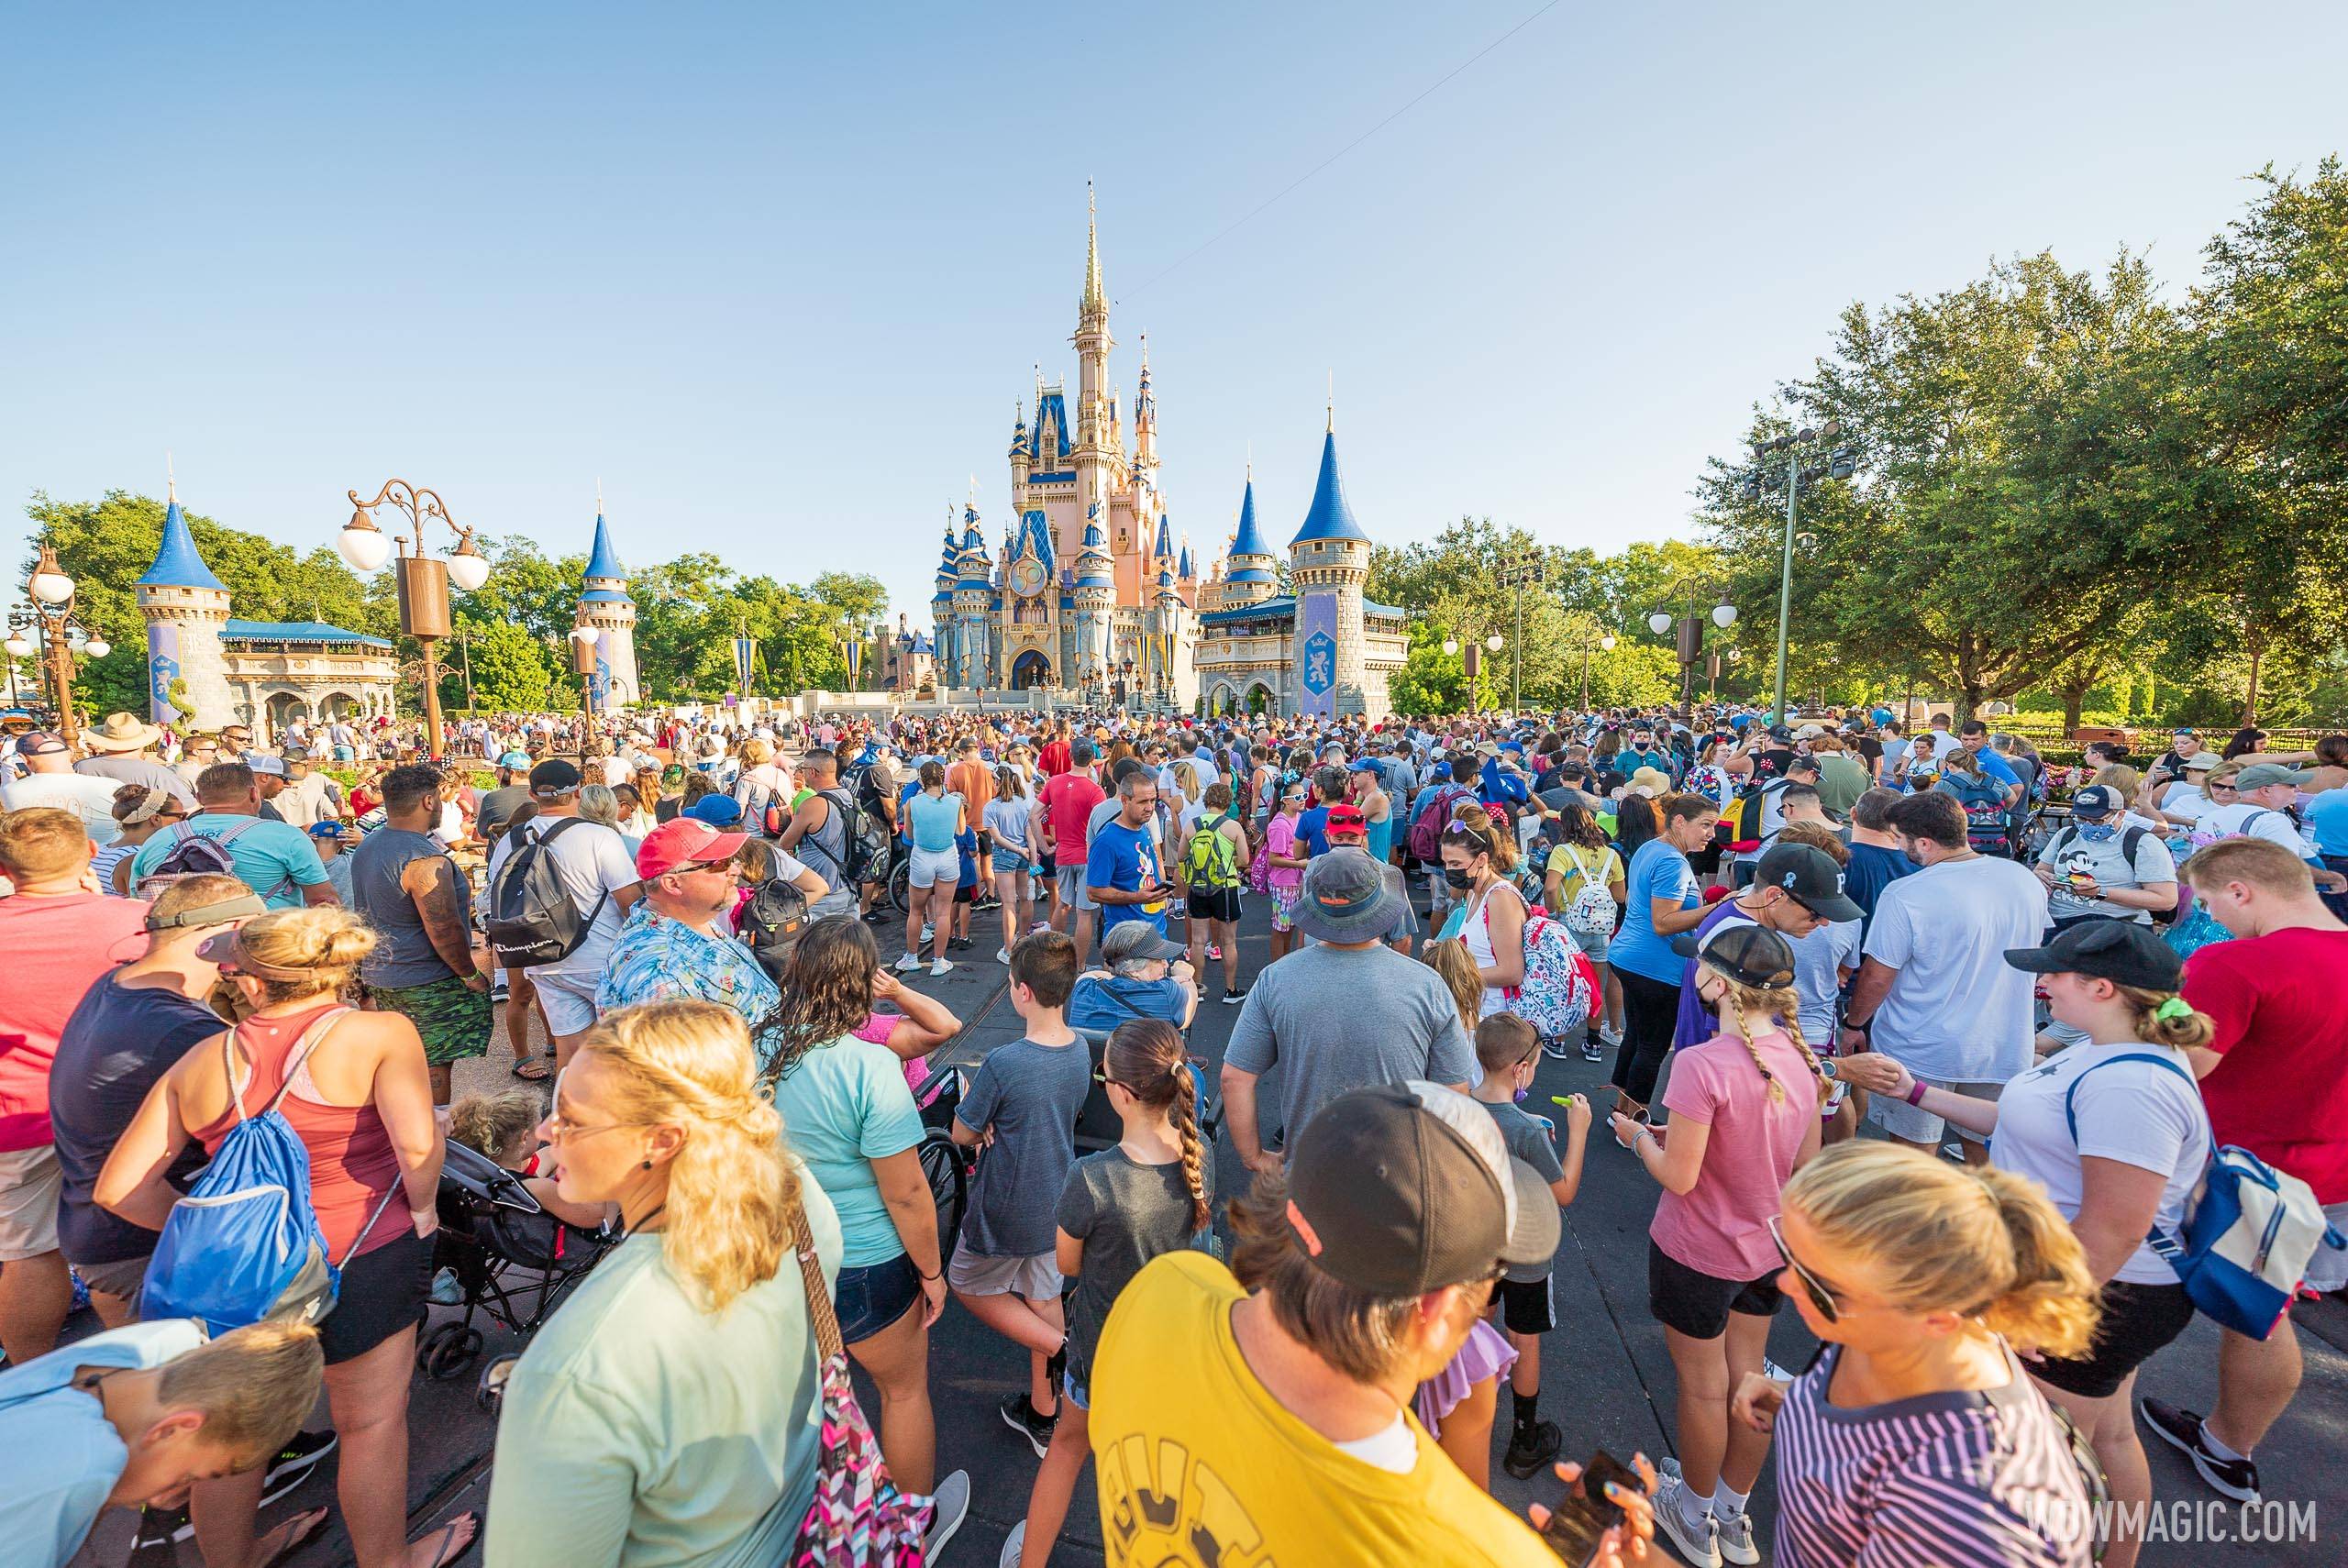 Walt Disney World dropped its mask requirements at indoor from February 17 2022